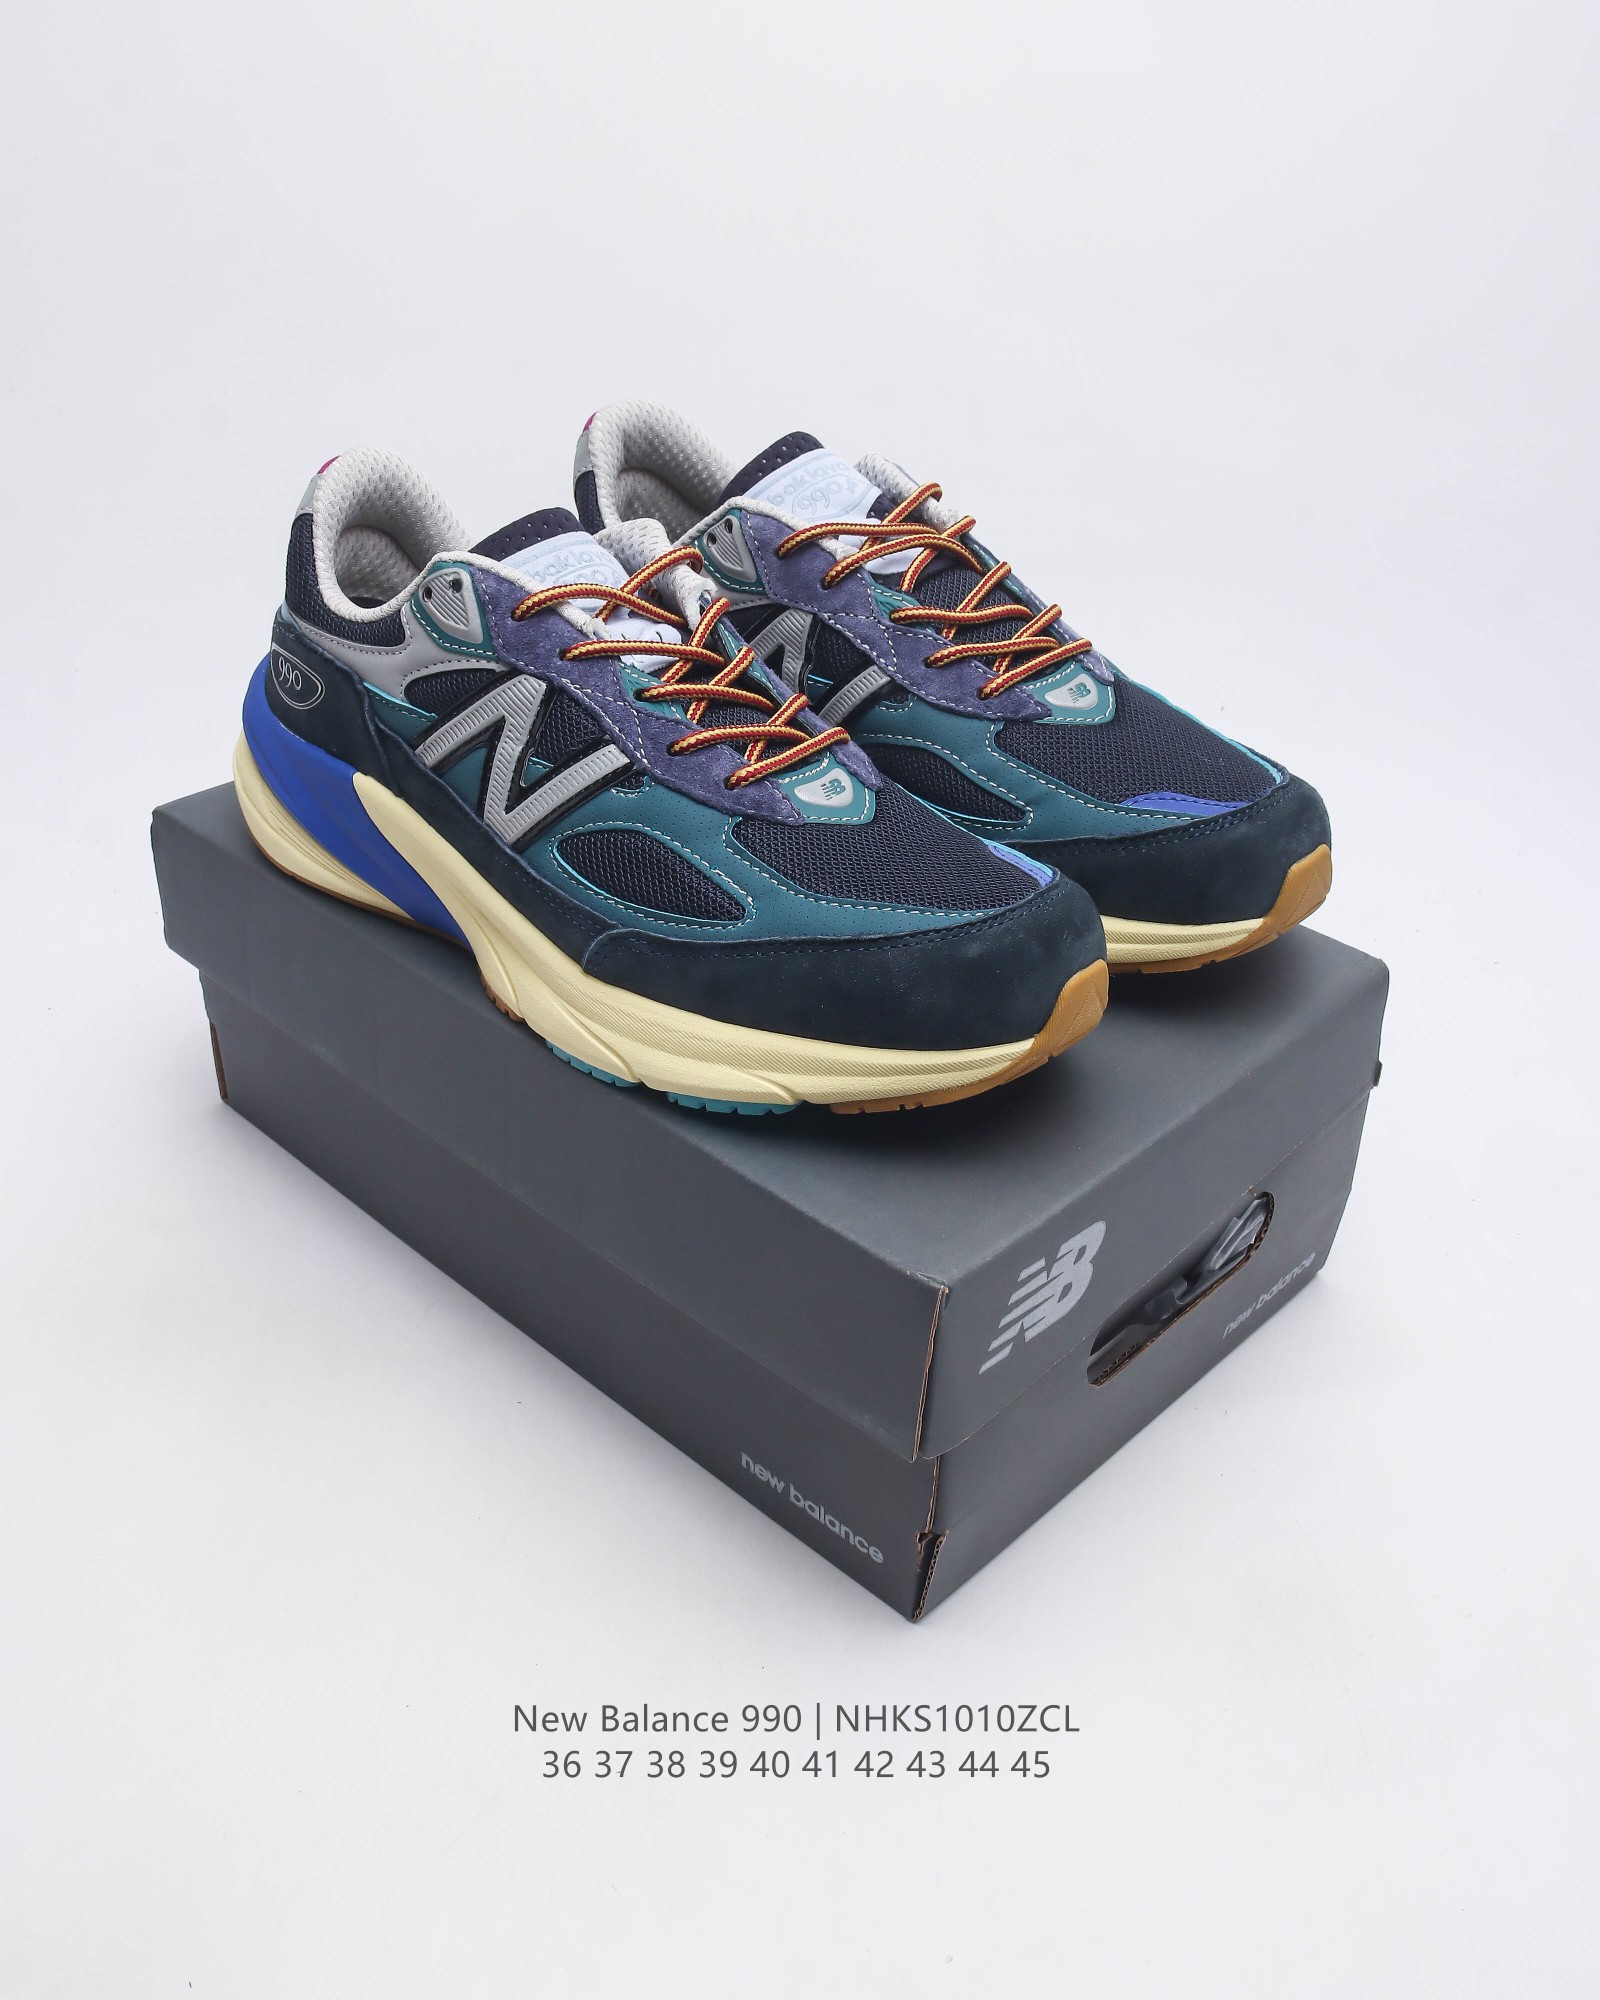 New Balance Shoes Sneakers Vintage Casual A1516017